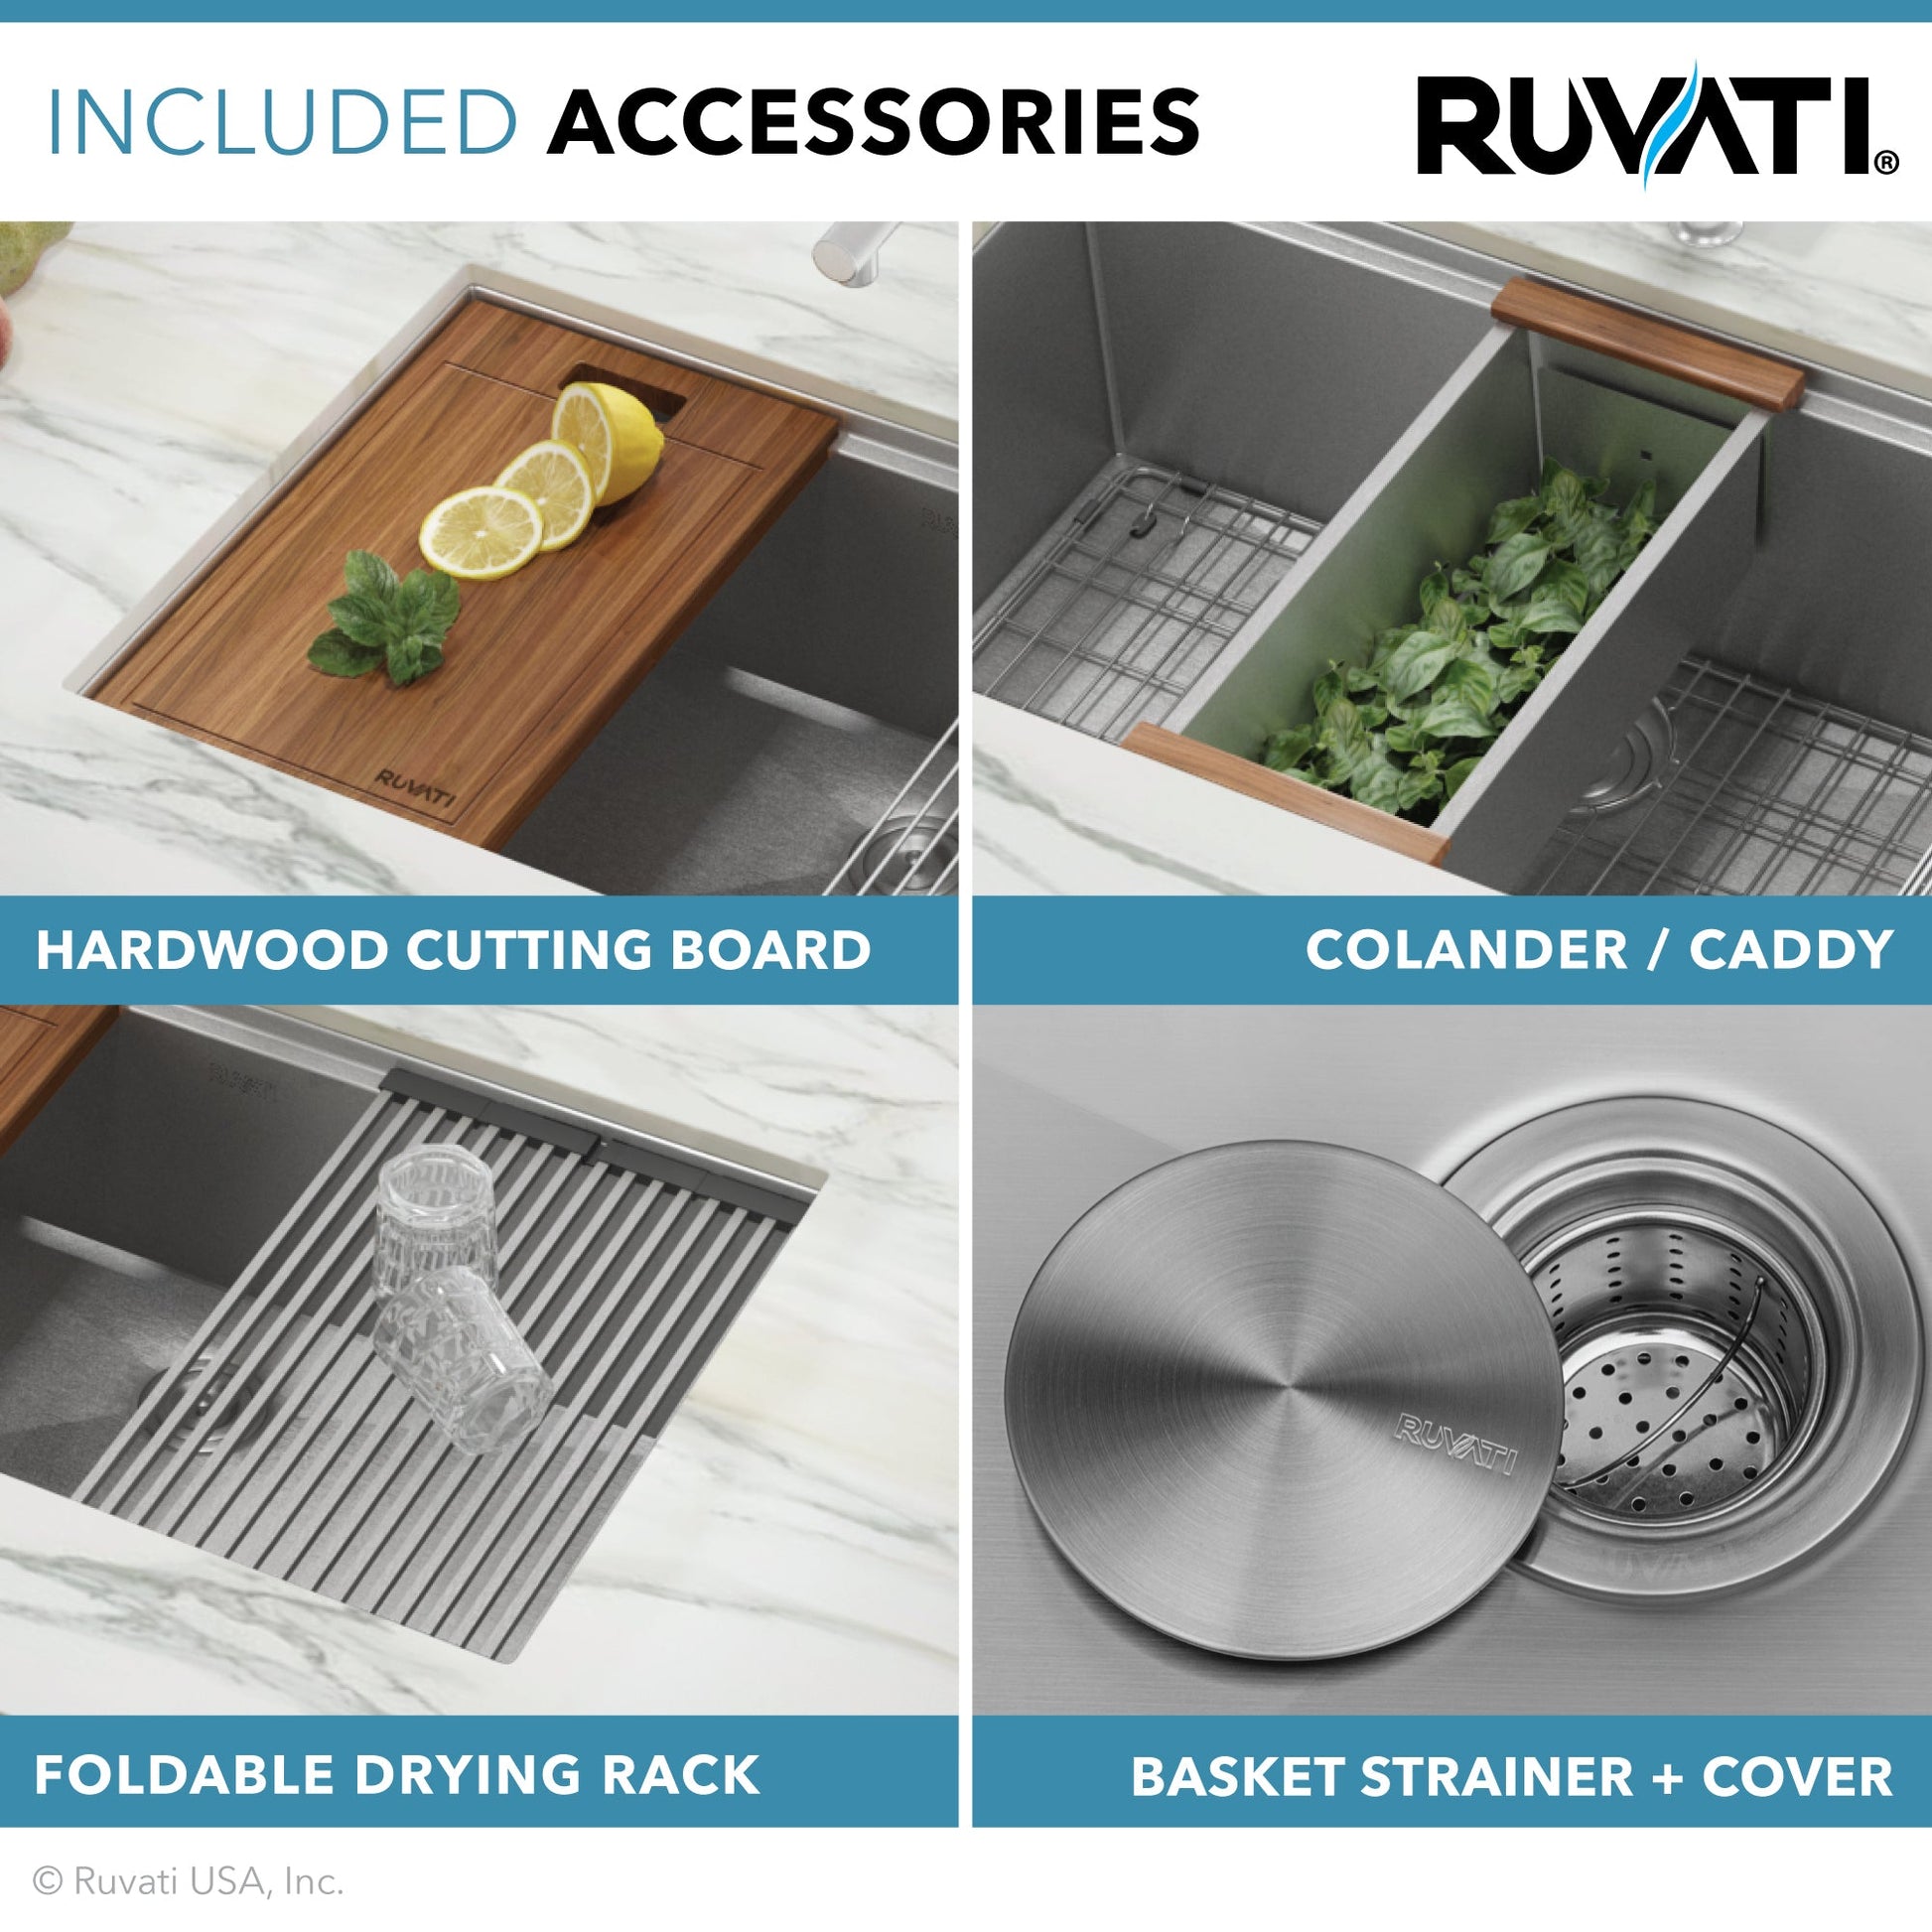 Ruvati Roma Pro 32” x 19" Undermount Stainless Steel Tight Radius Single Bowl Workstation Kitchen Sink With Bottom Rinse Grid and Drain Assembly